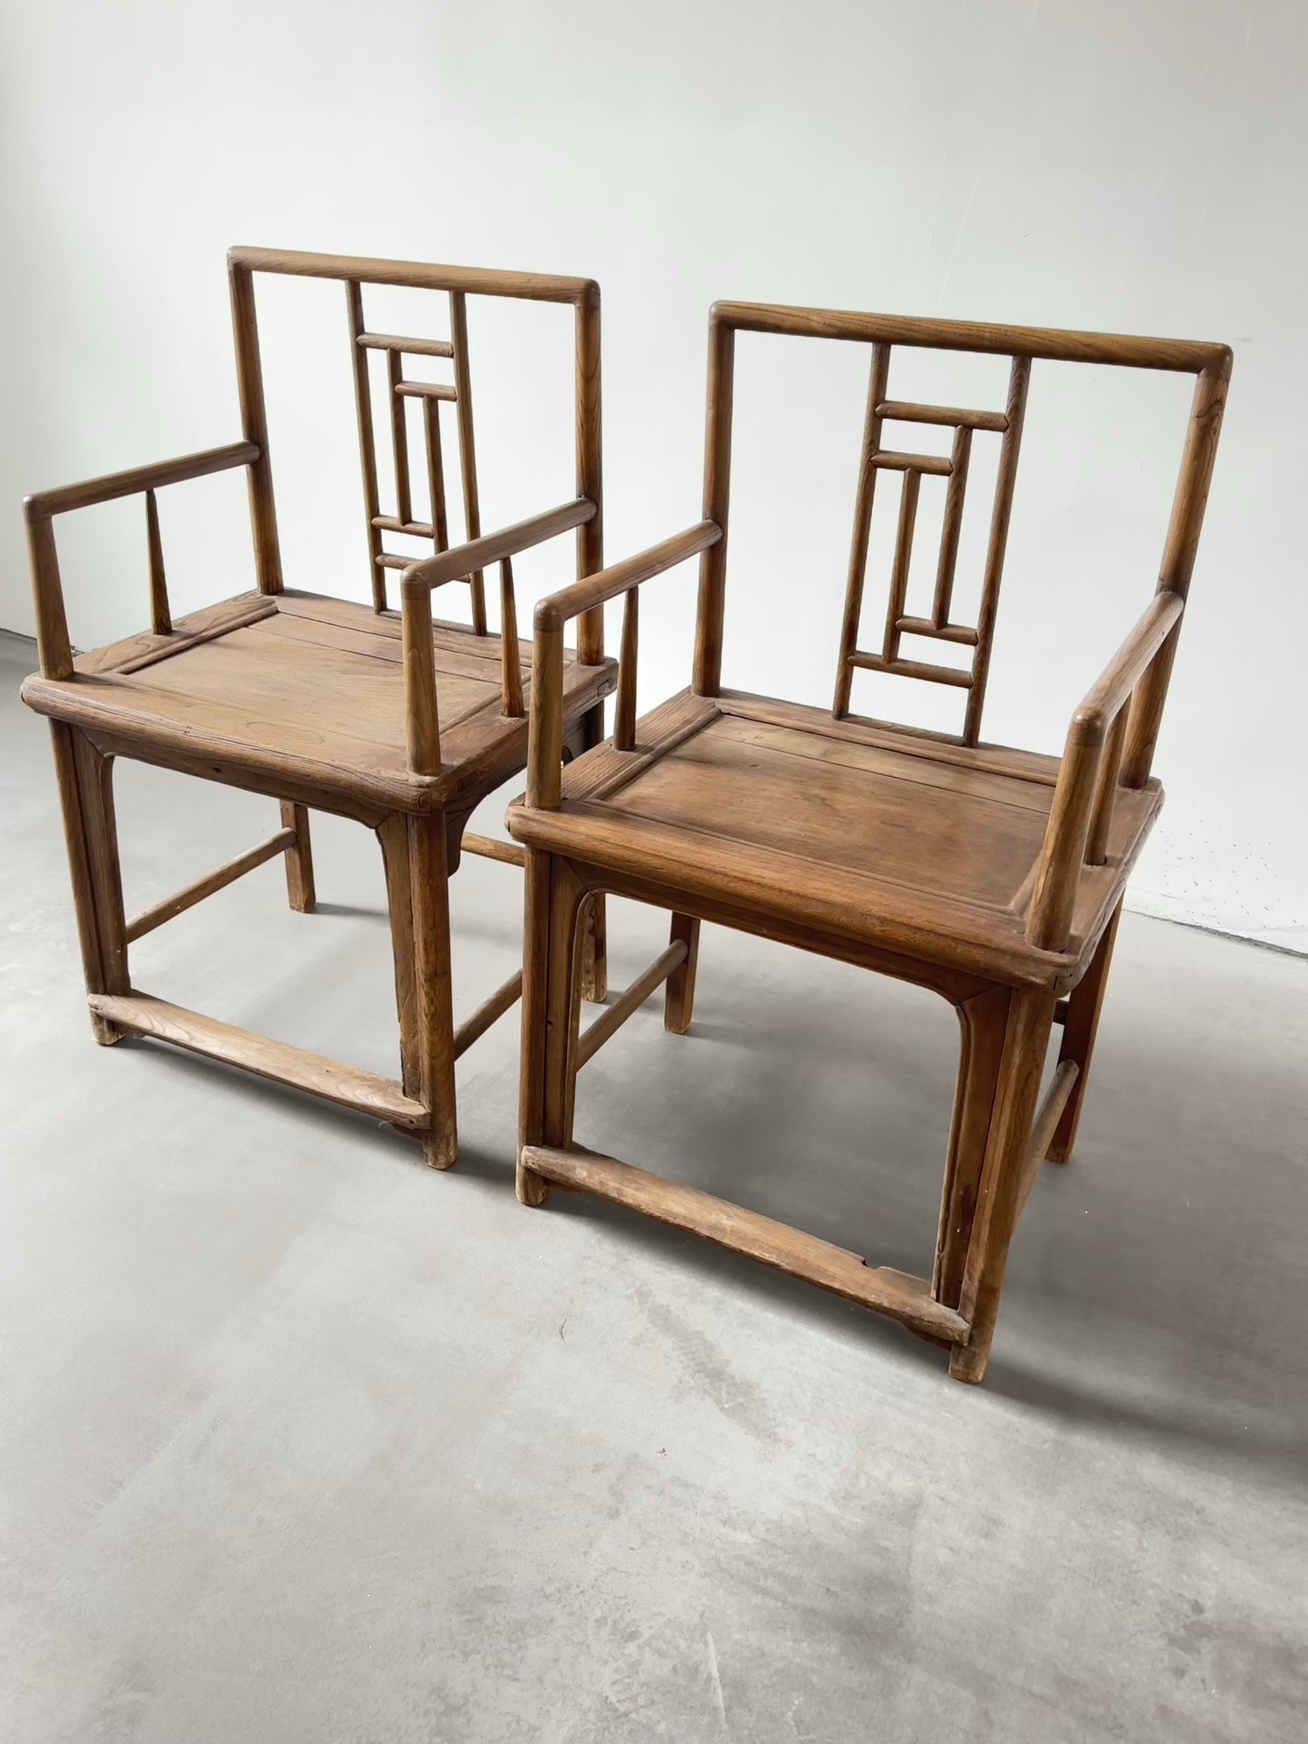 Pair of Official Chairs 